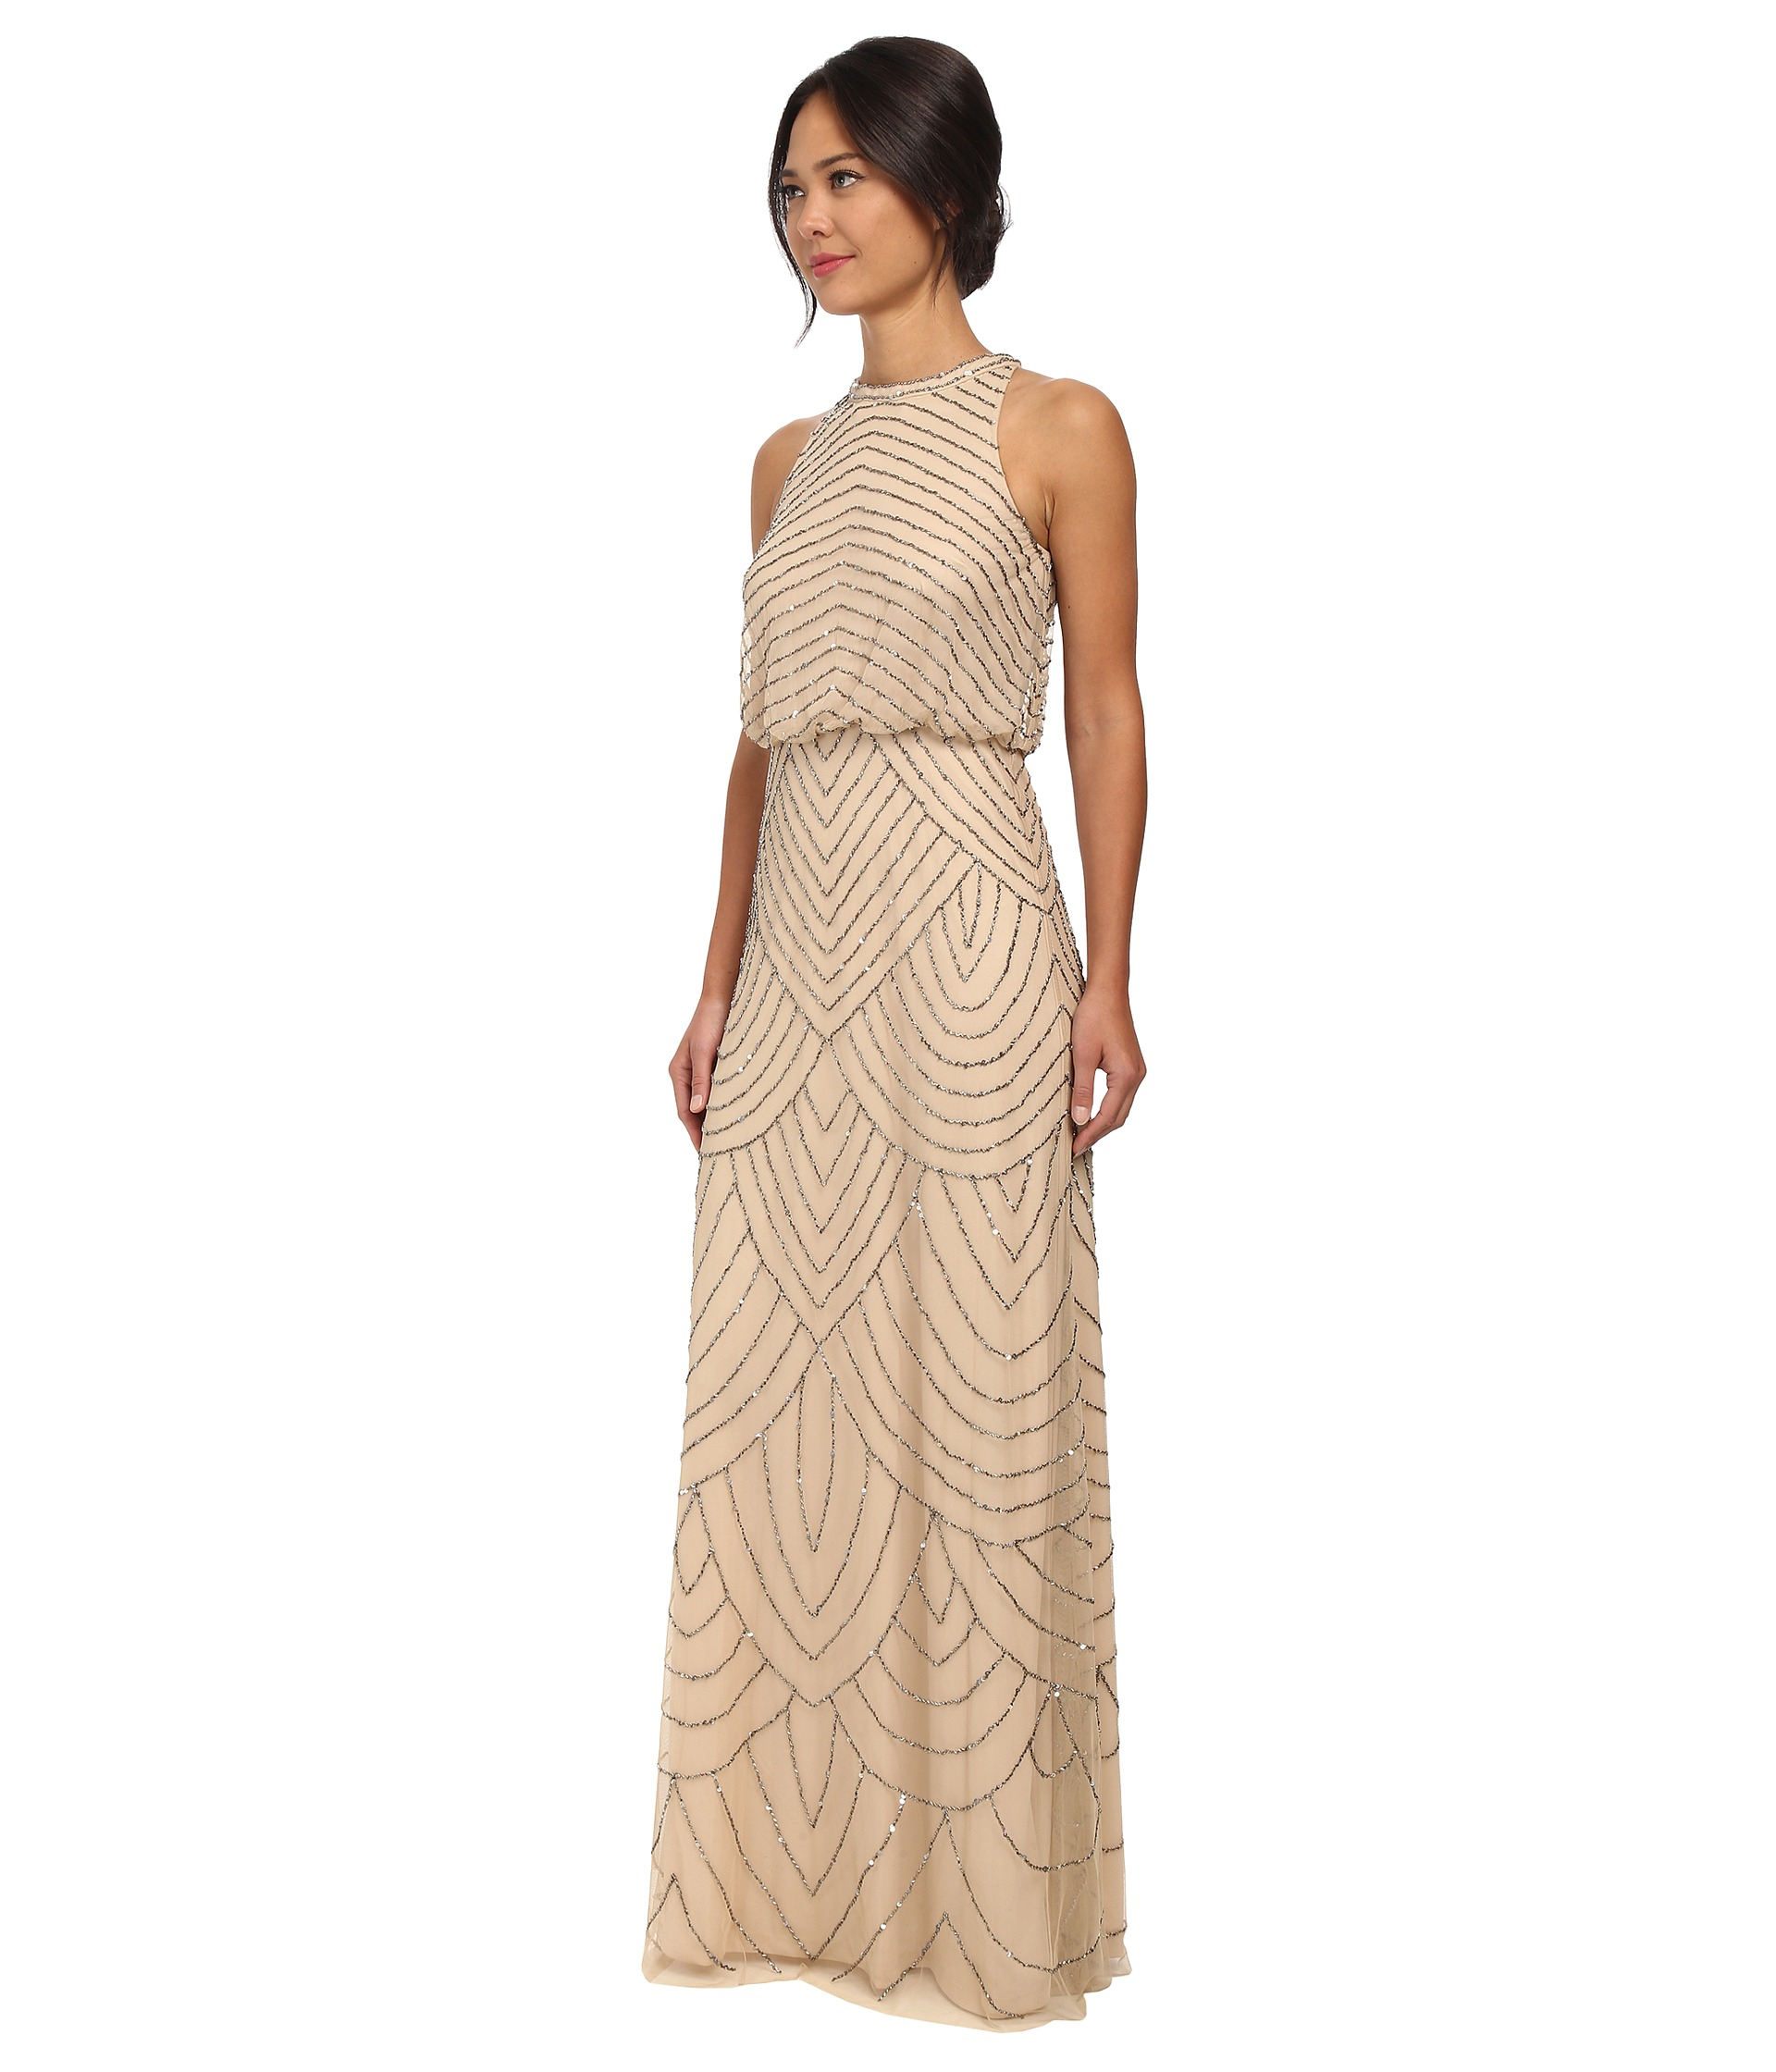 Adrianna Papell Beaded Halter Gown in Nude (Natural) - Lyst